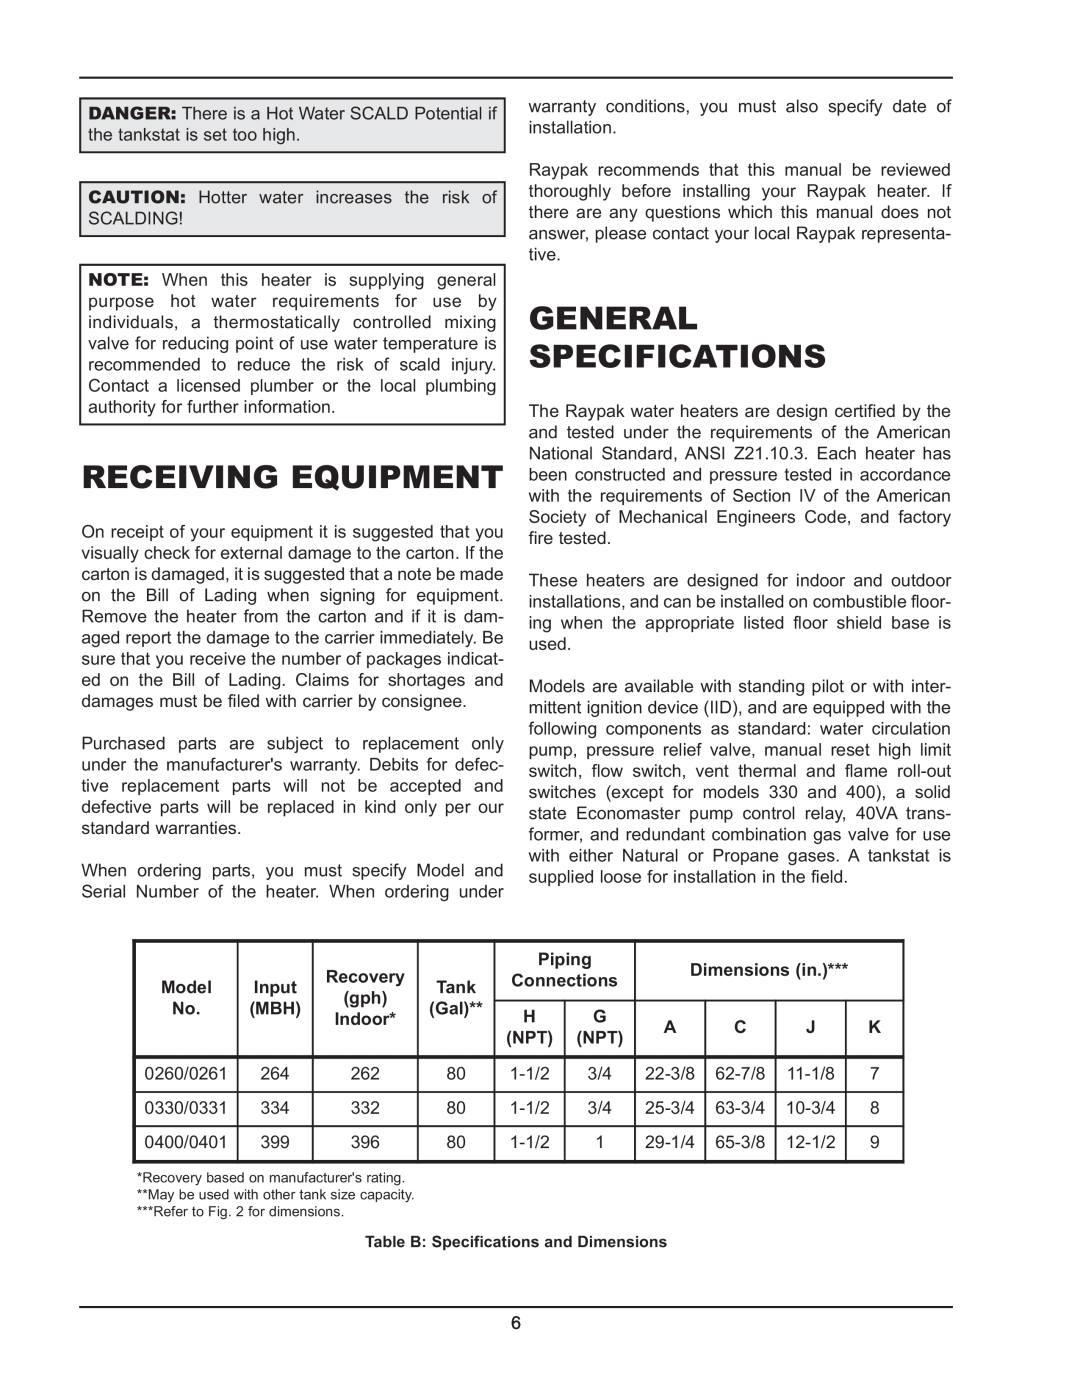 Raypak 2600401 Receiving Equipment, General Specifications, Piping, Dimensions in, Recovery, Connections, Input, Indoor 